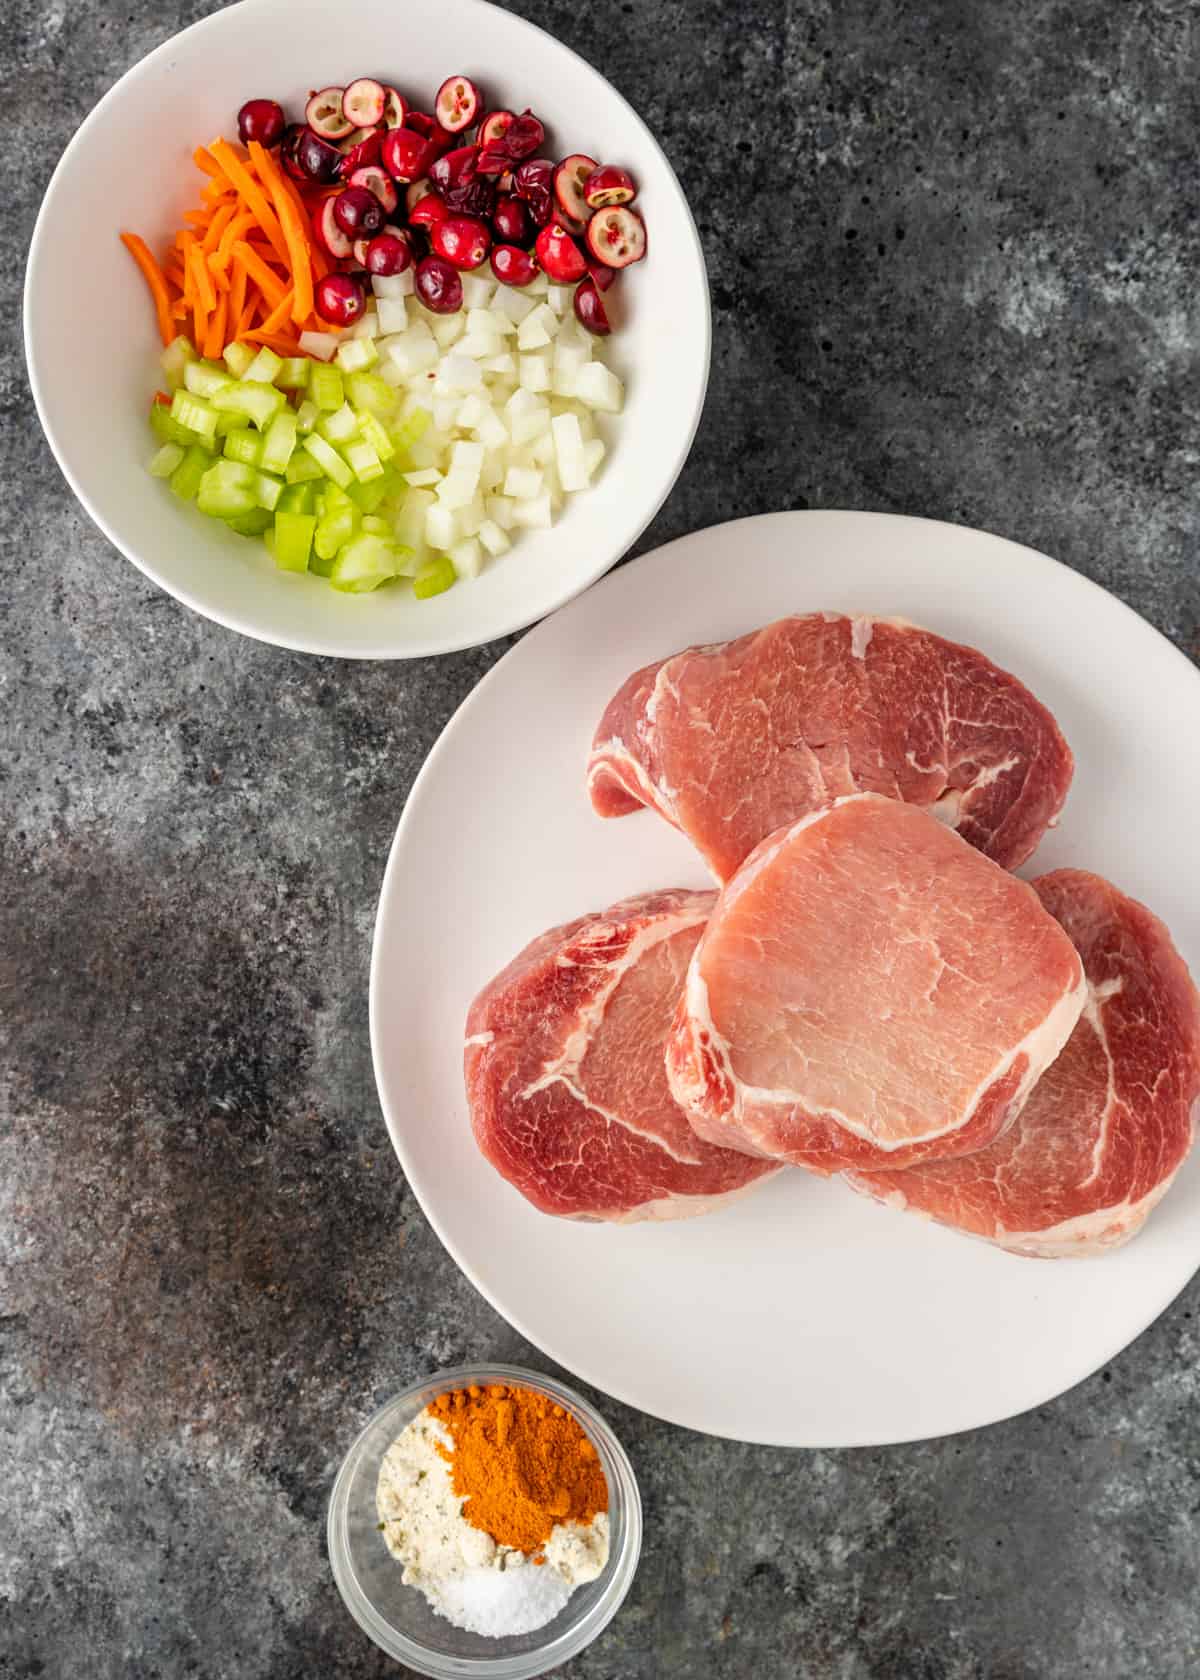 A bowl of diced vegetables on a plate, with Pork chops